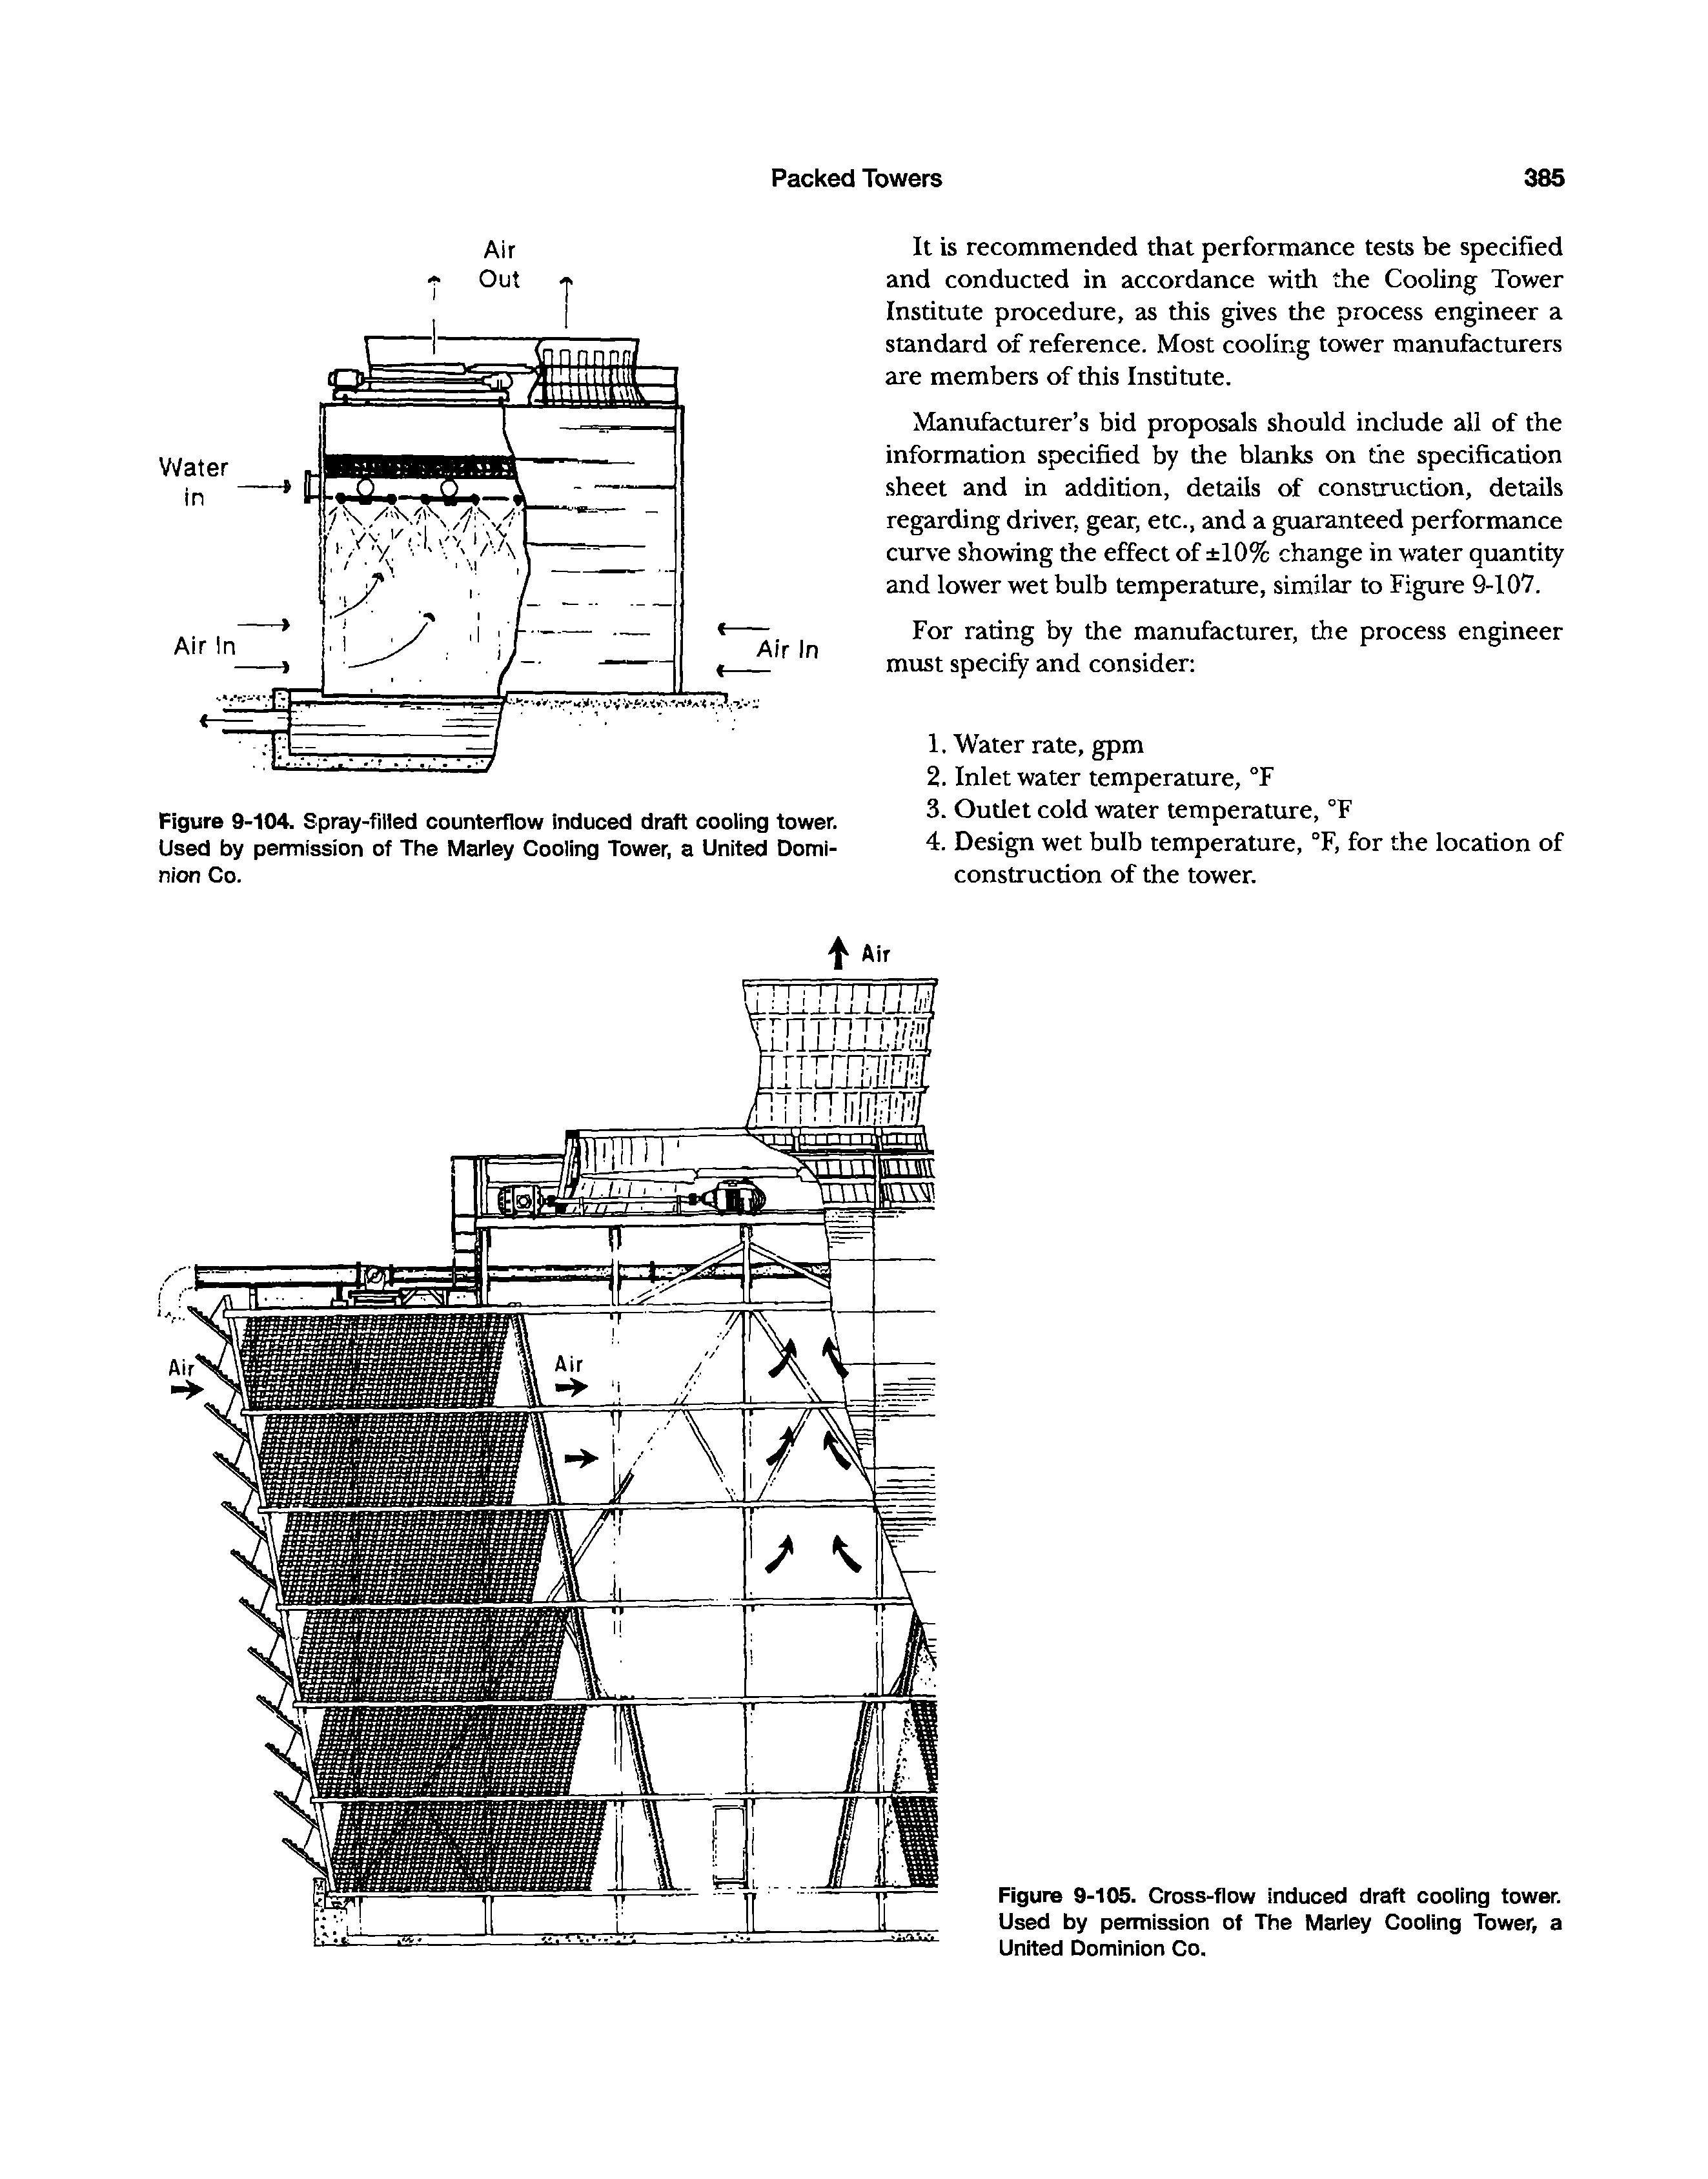 Figure 9-104. Spray-filled counterflow induced draft cooling tower. Used by permission of The Marley Cooling Tower, a United Dominion Co.